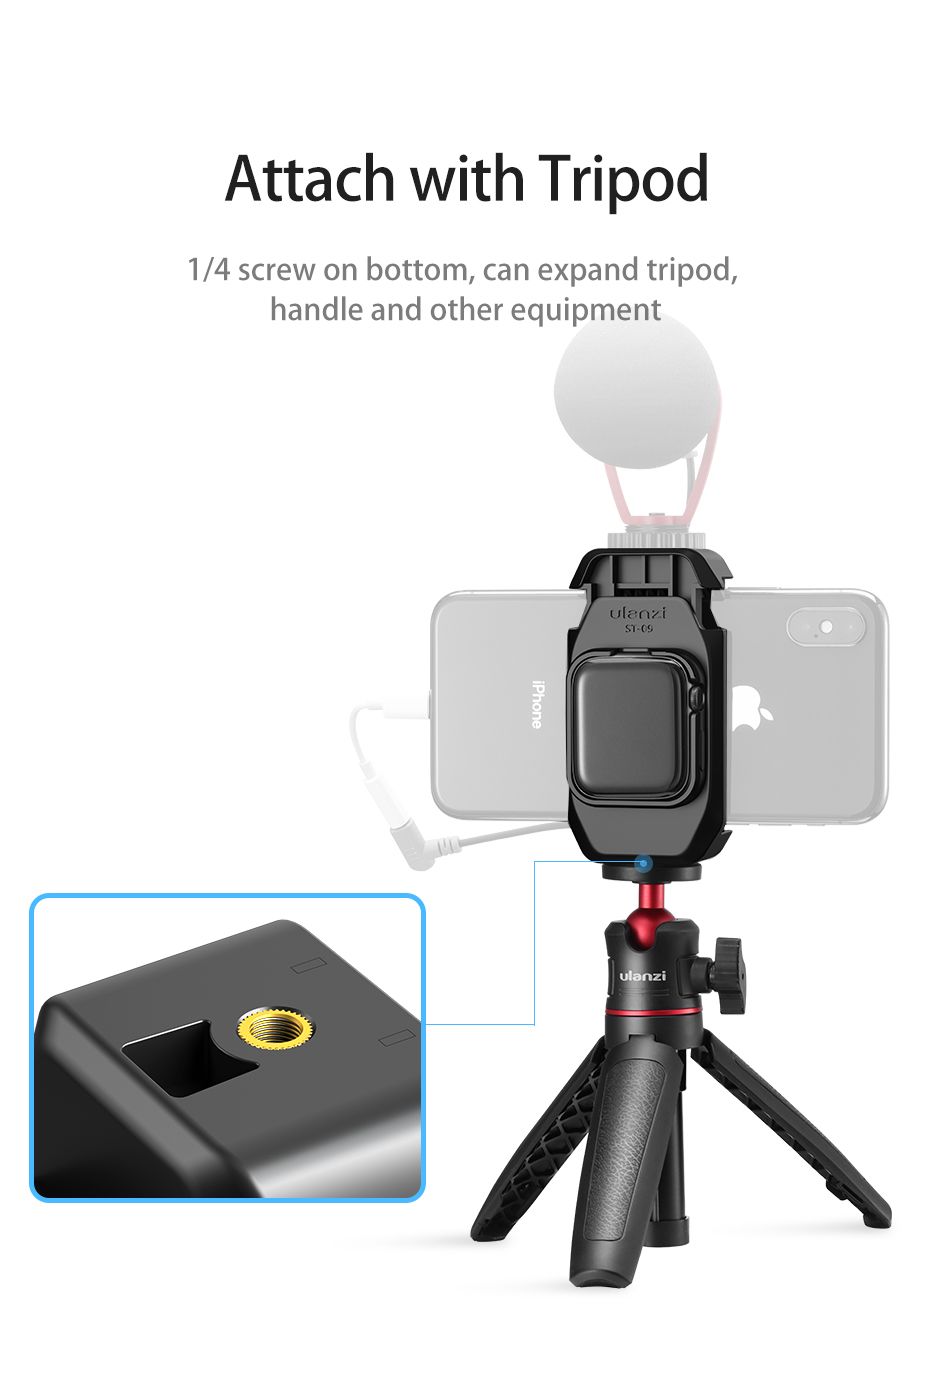 Ulanzi-ST-09-Selfie-Vlog-Phone-Clip-for-iPhone-Apple-Watch-Series-5-Cold-Shoe-Tripod-Mount-Holder-Co-1711298